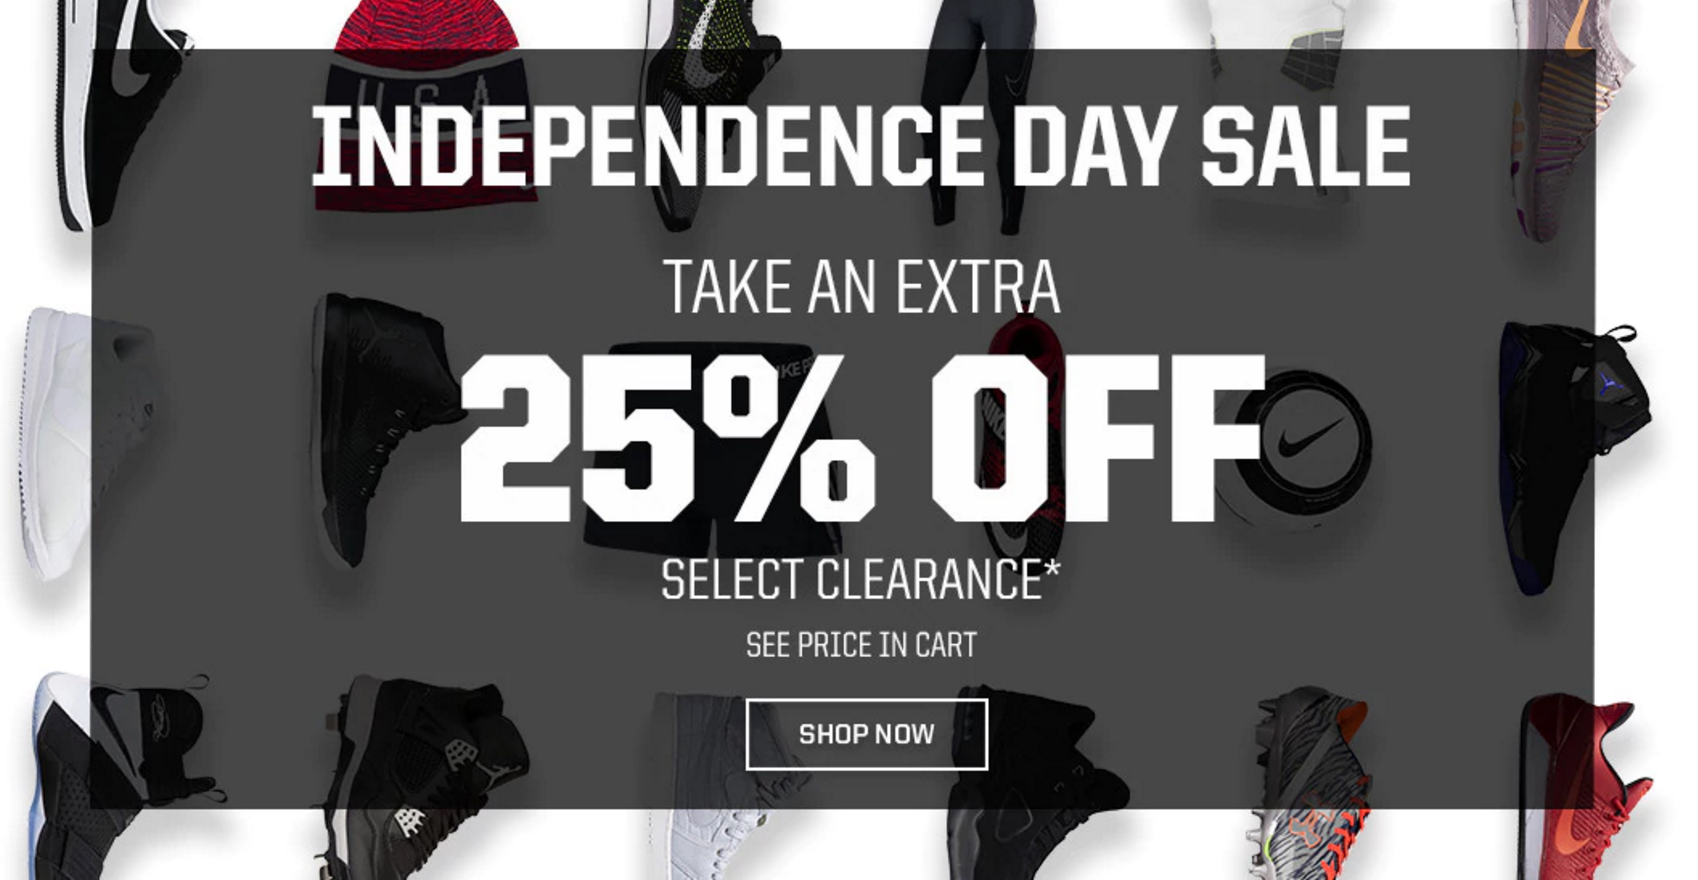 eastbay independence day sale